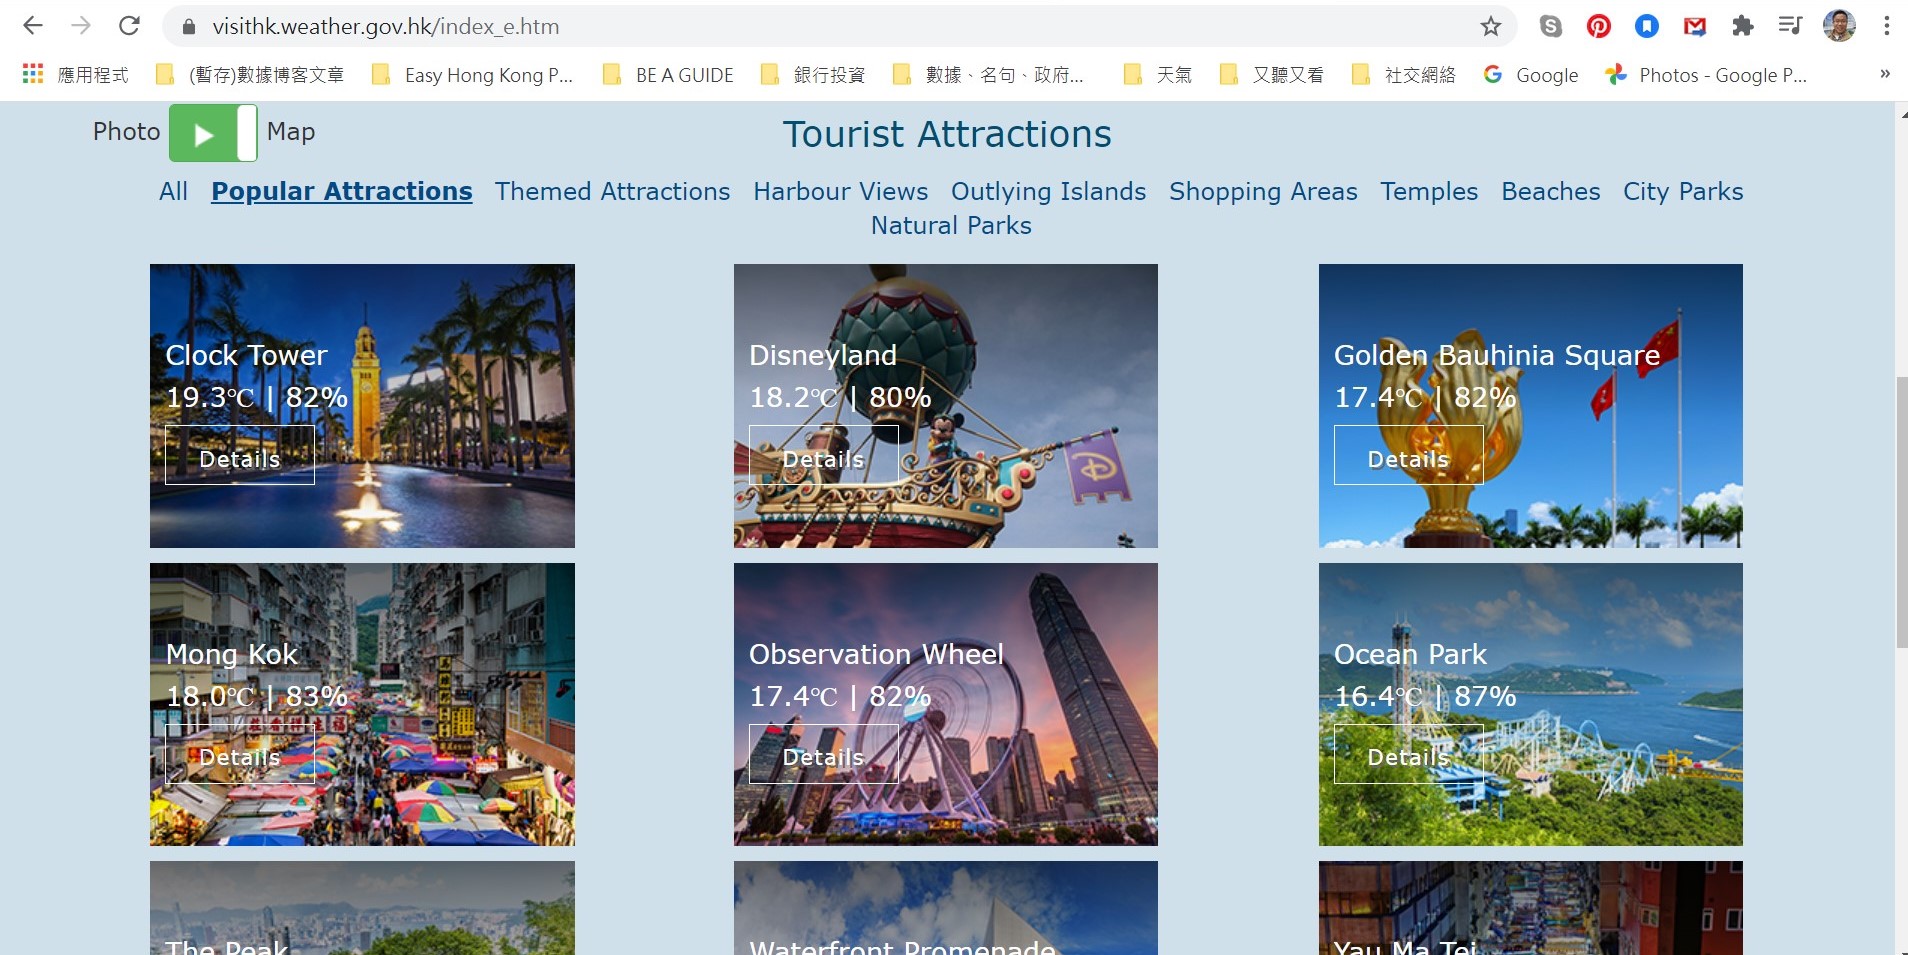 Check weather info for 40 attractions in Hong Kong